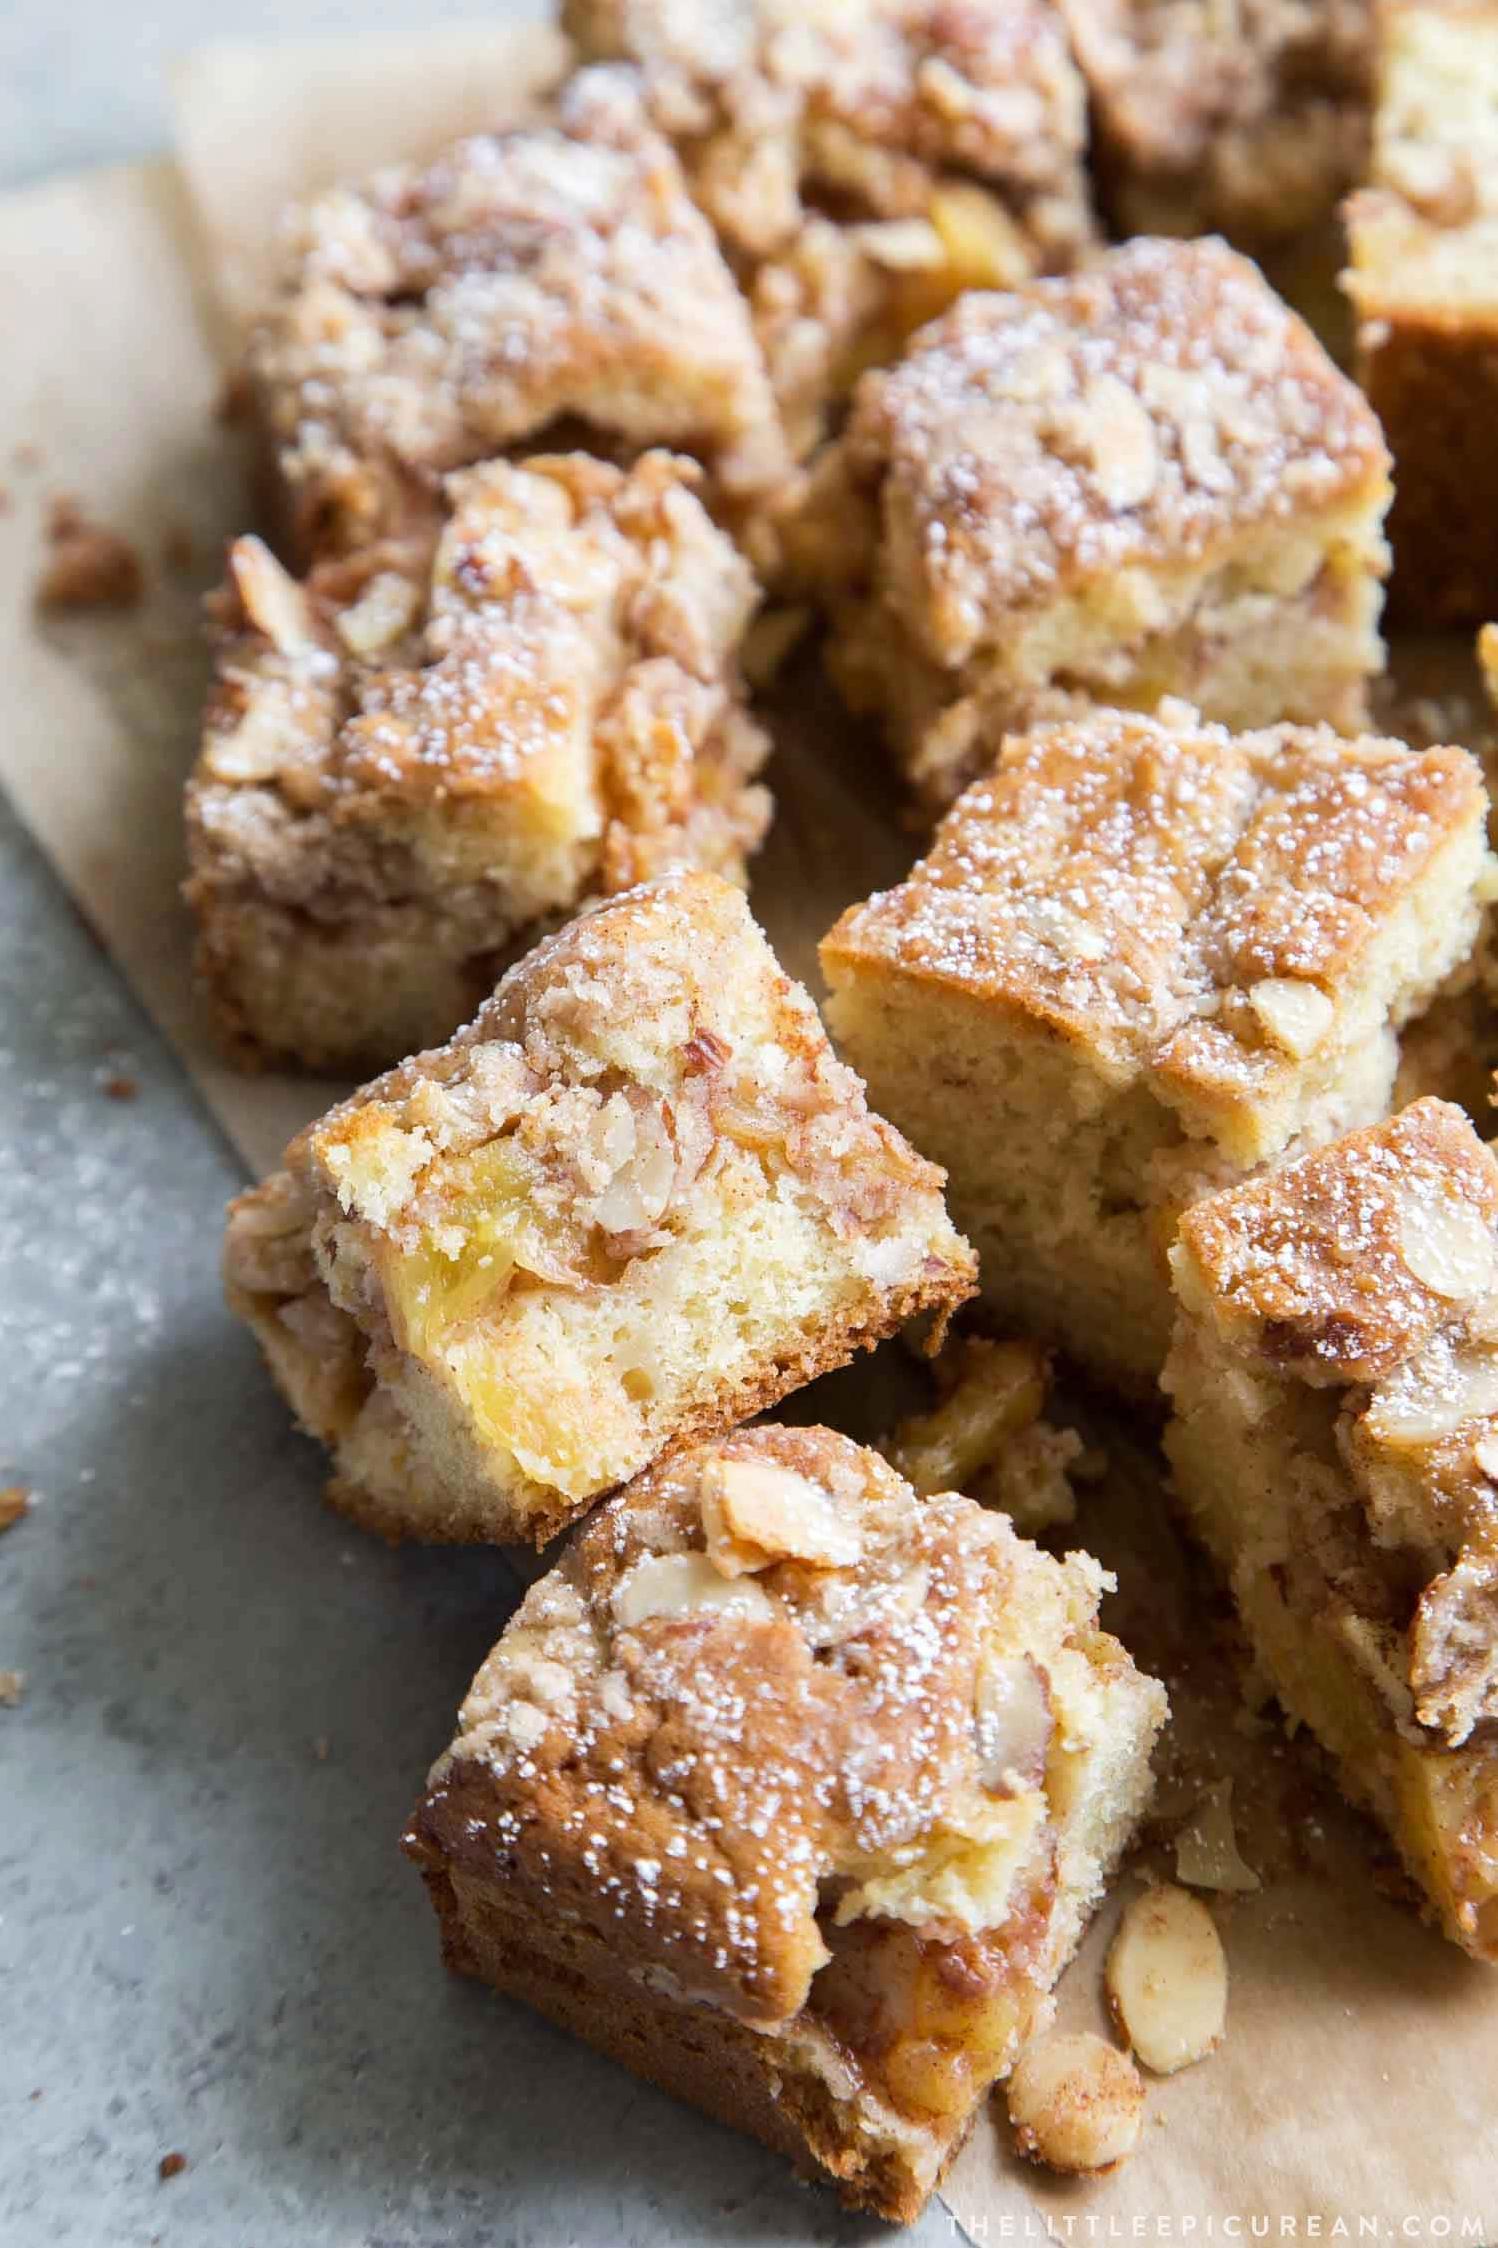  This coffee cake is perfect for brunch, or an afternoon pick-me-up